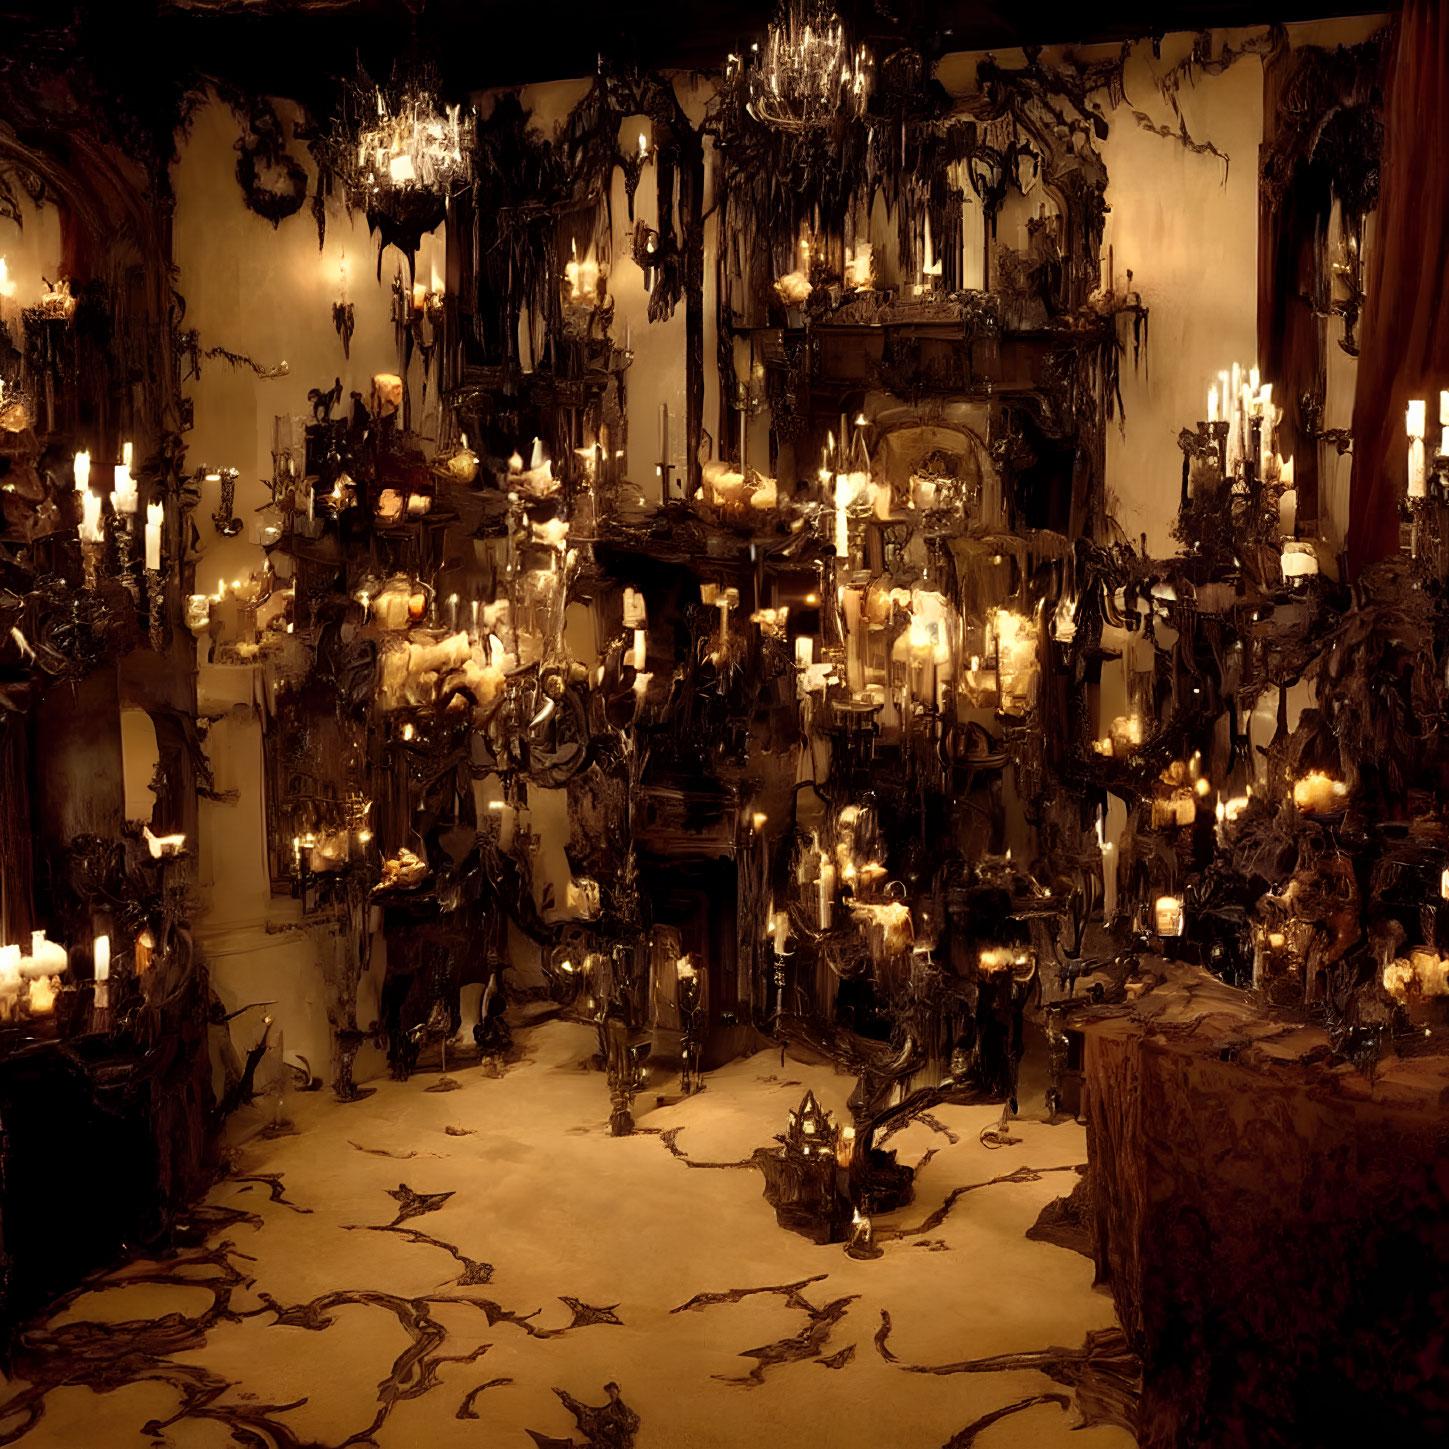 Eerie antique room with candles and baroque decor